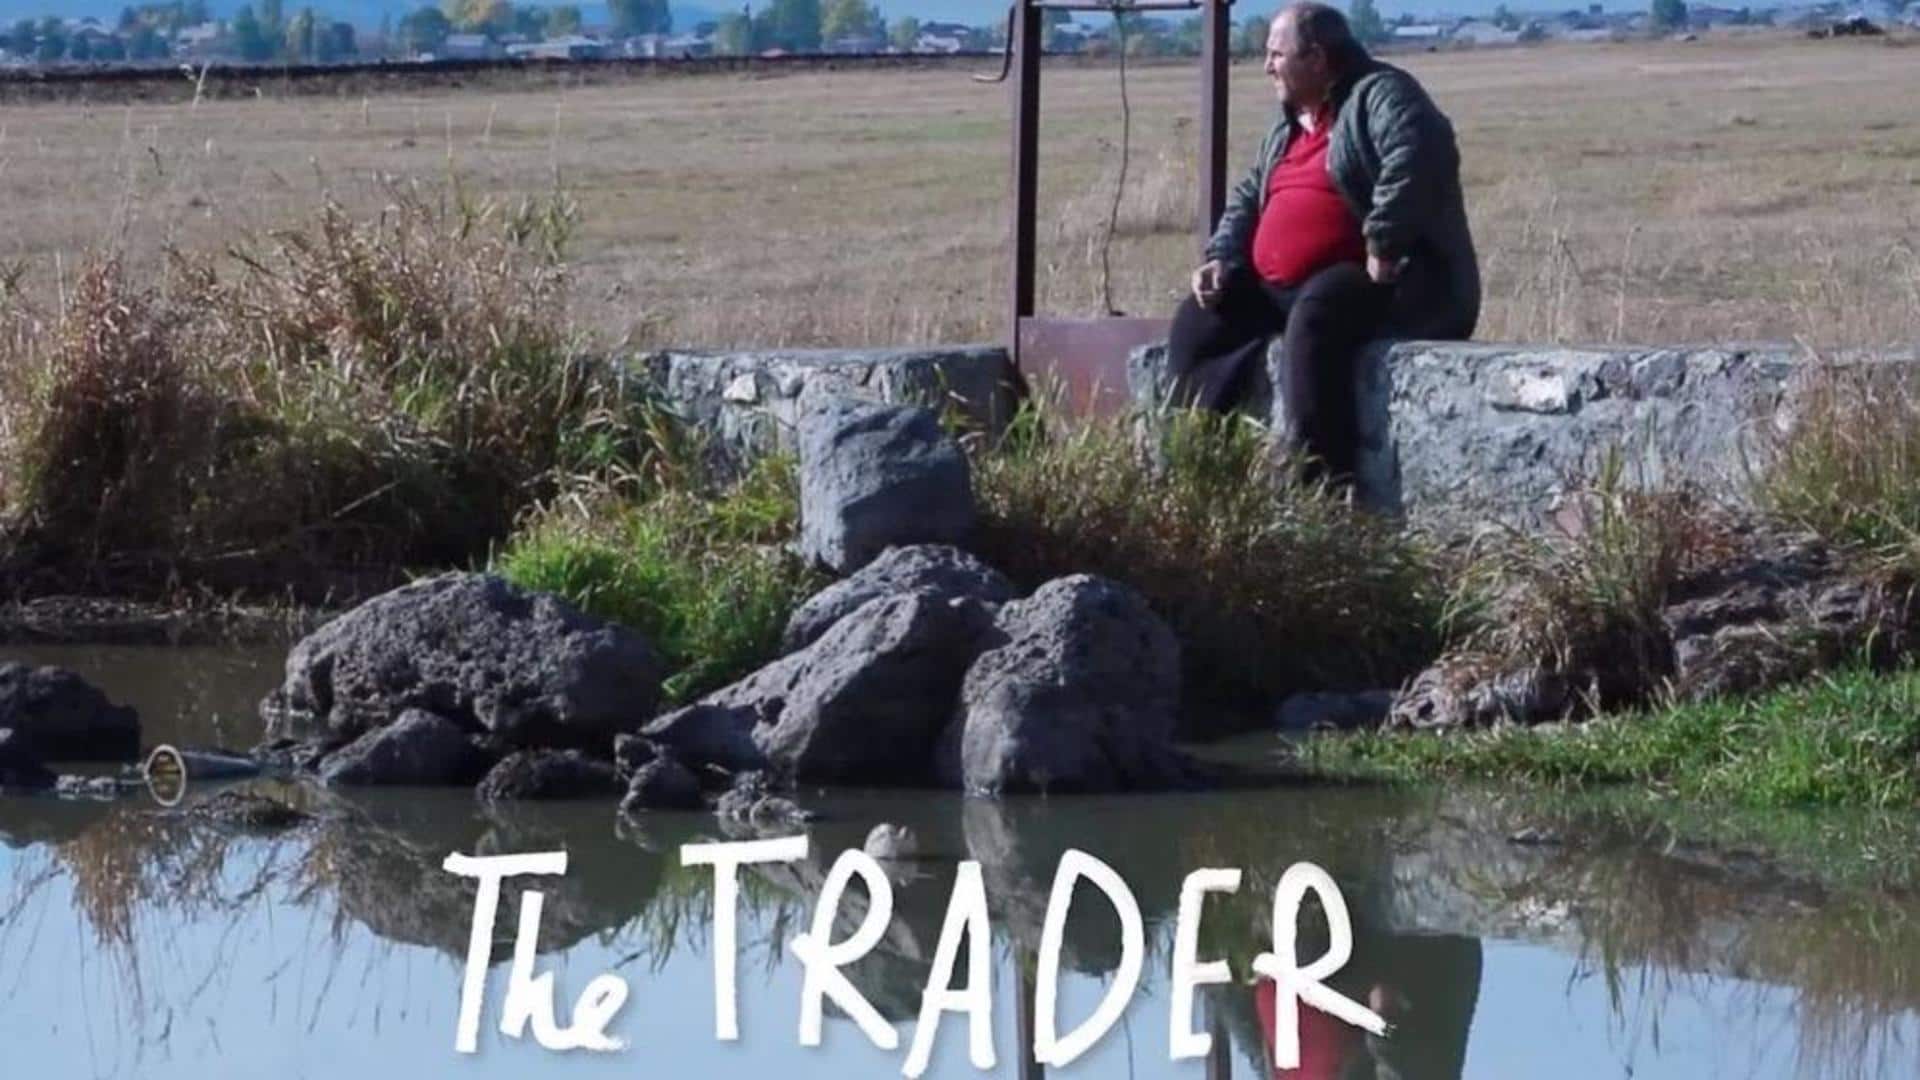 #NewsBytesRecommends: 'The Trader' on Netflix—crushing tale of despondent gloom